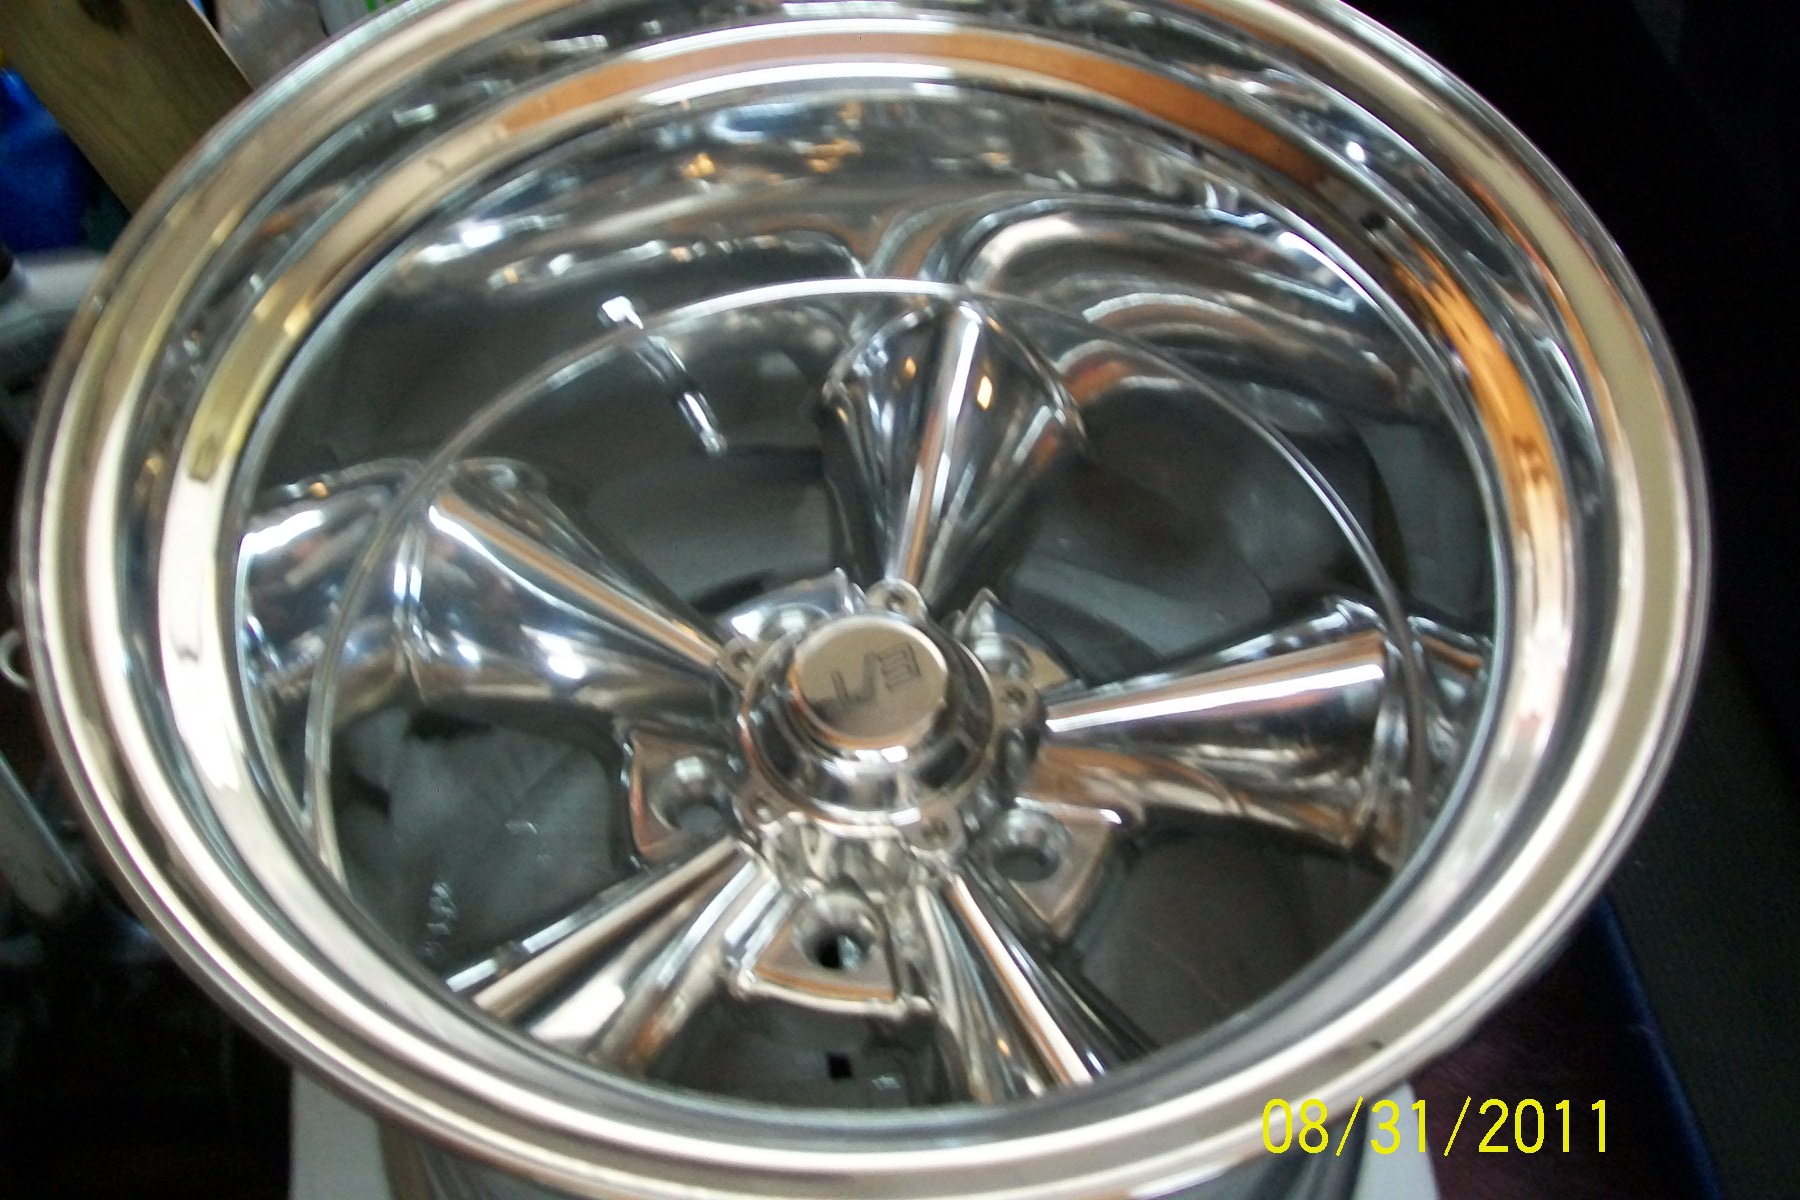 Attached picture 6818428-cudawithnewETwheels006.JPG